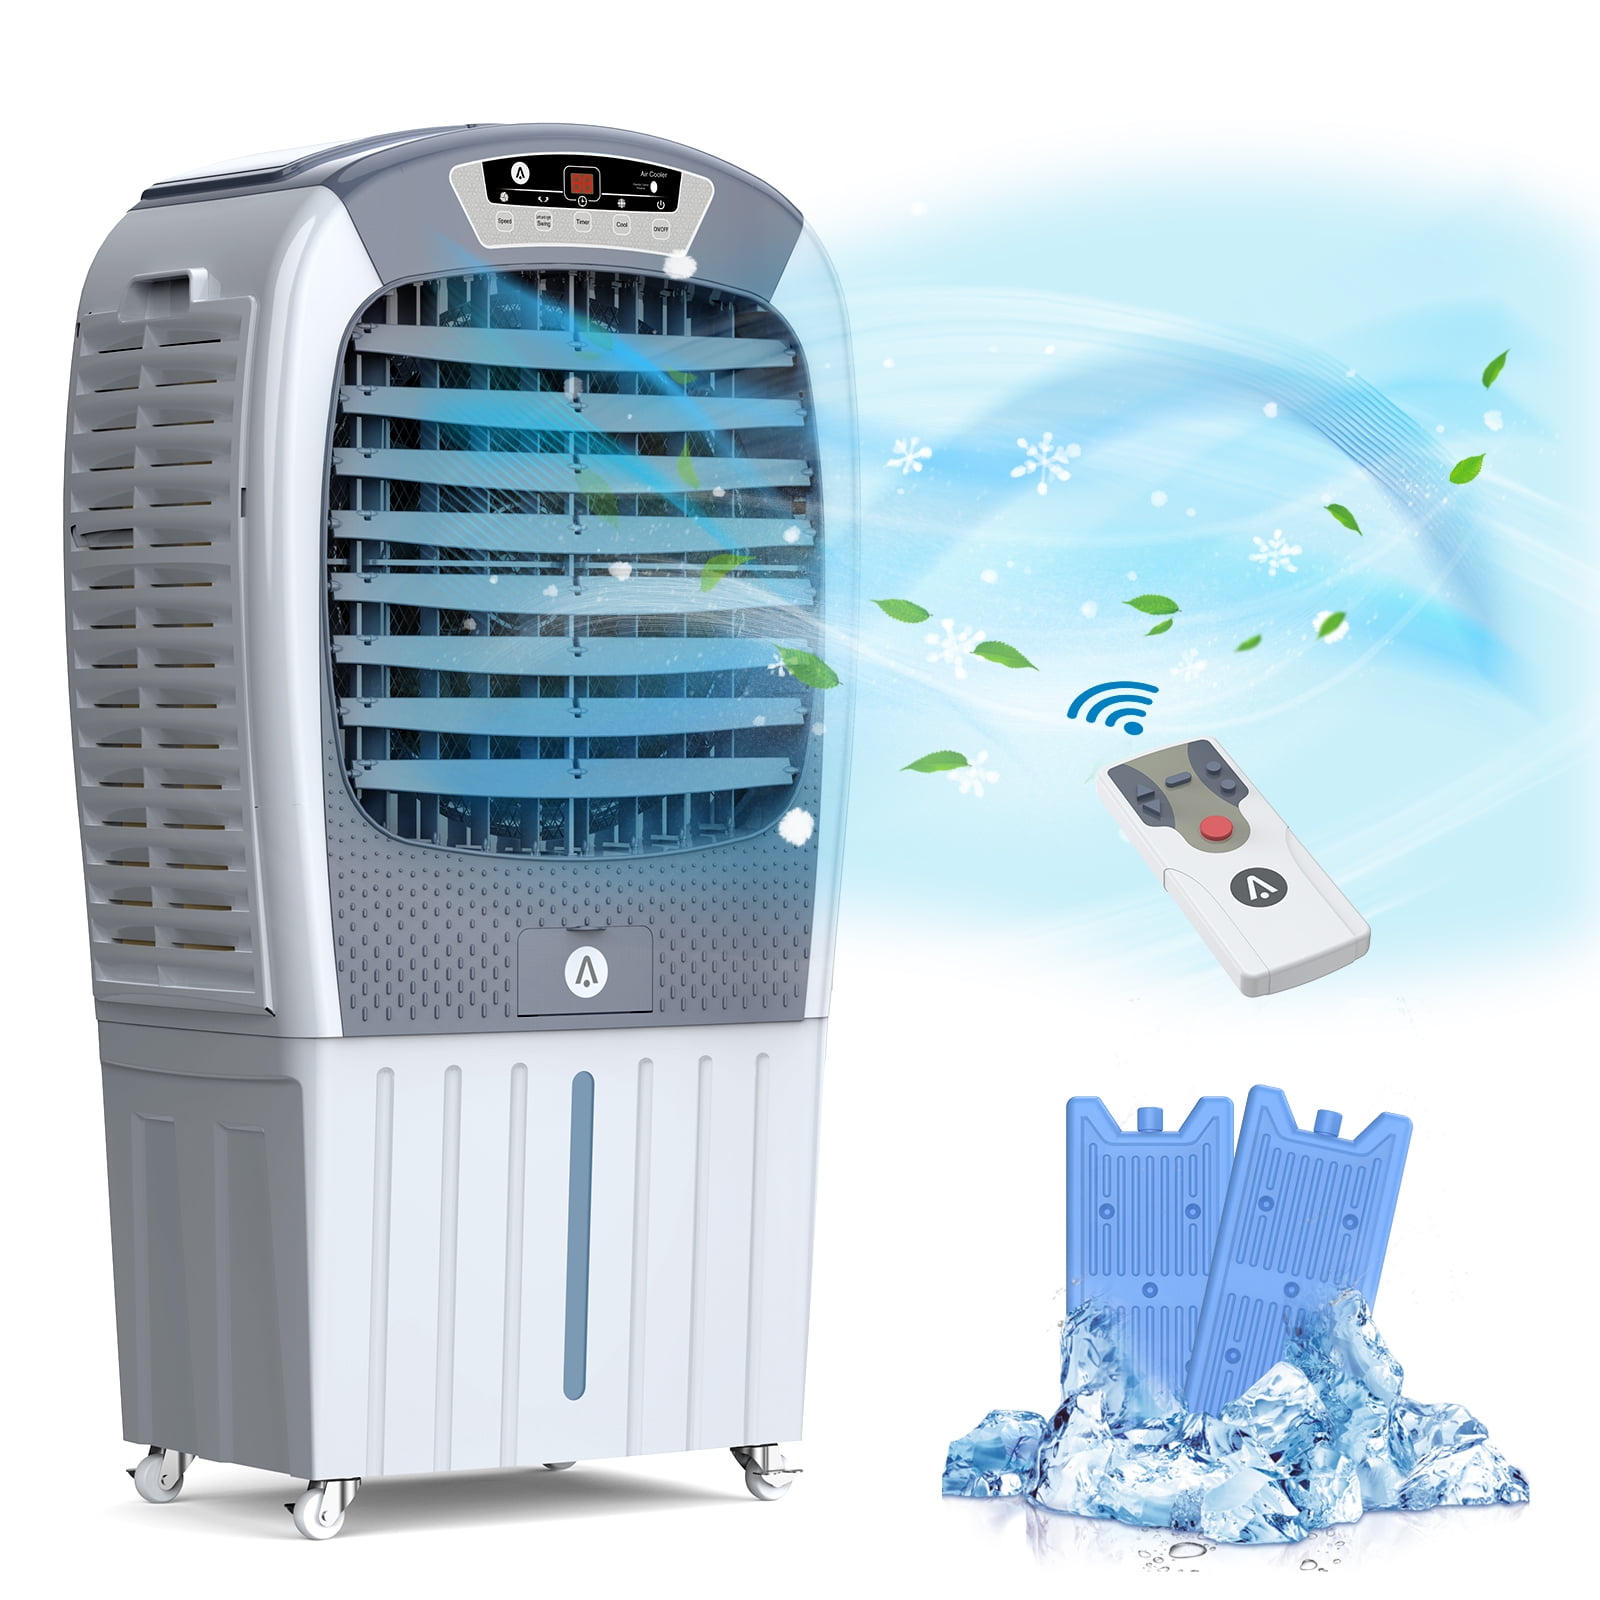 Evaporative Air Cooler,3 in 1 Portable Evaporative Cooler with Remote  Control,3 Speeds,3 Modes,Evaporative Air Coolers Fan Conditioner Cooling  for